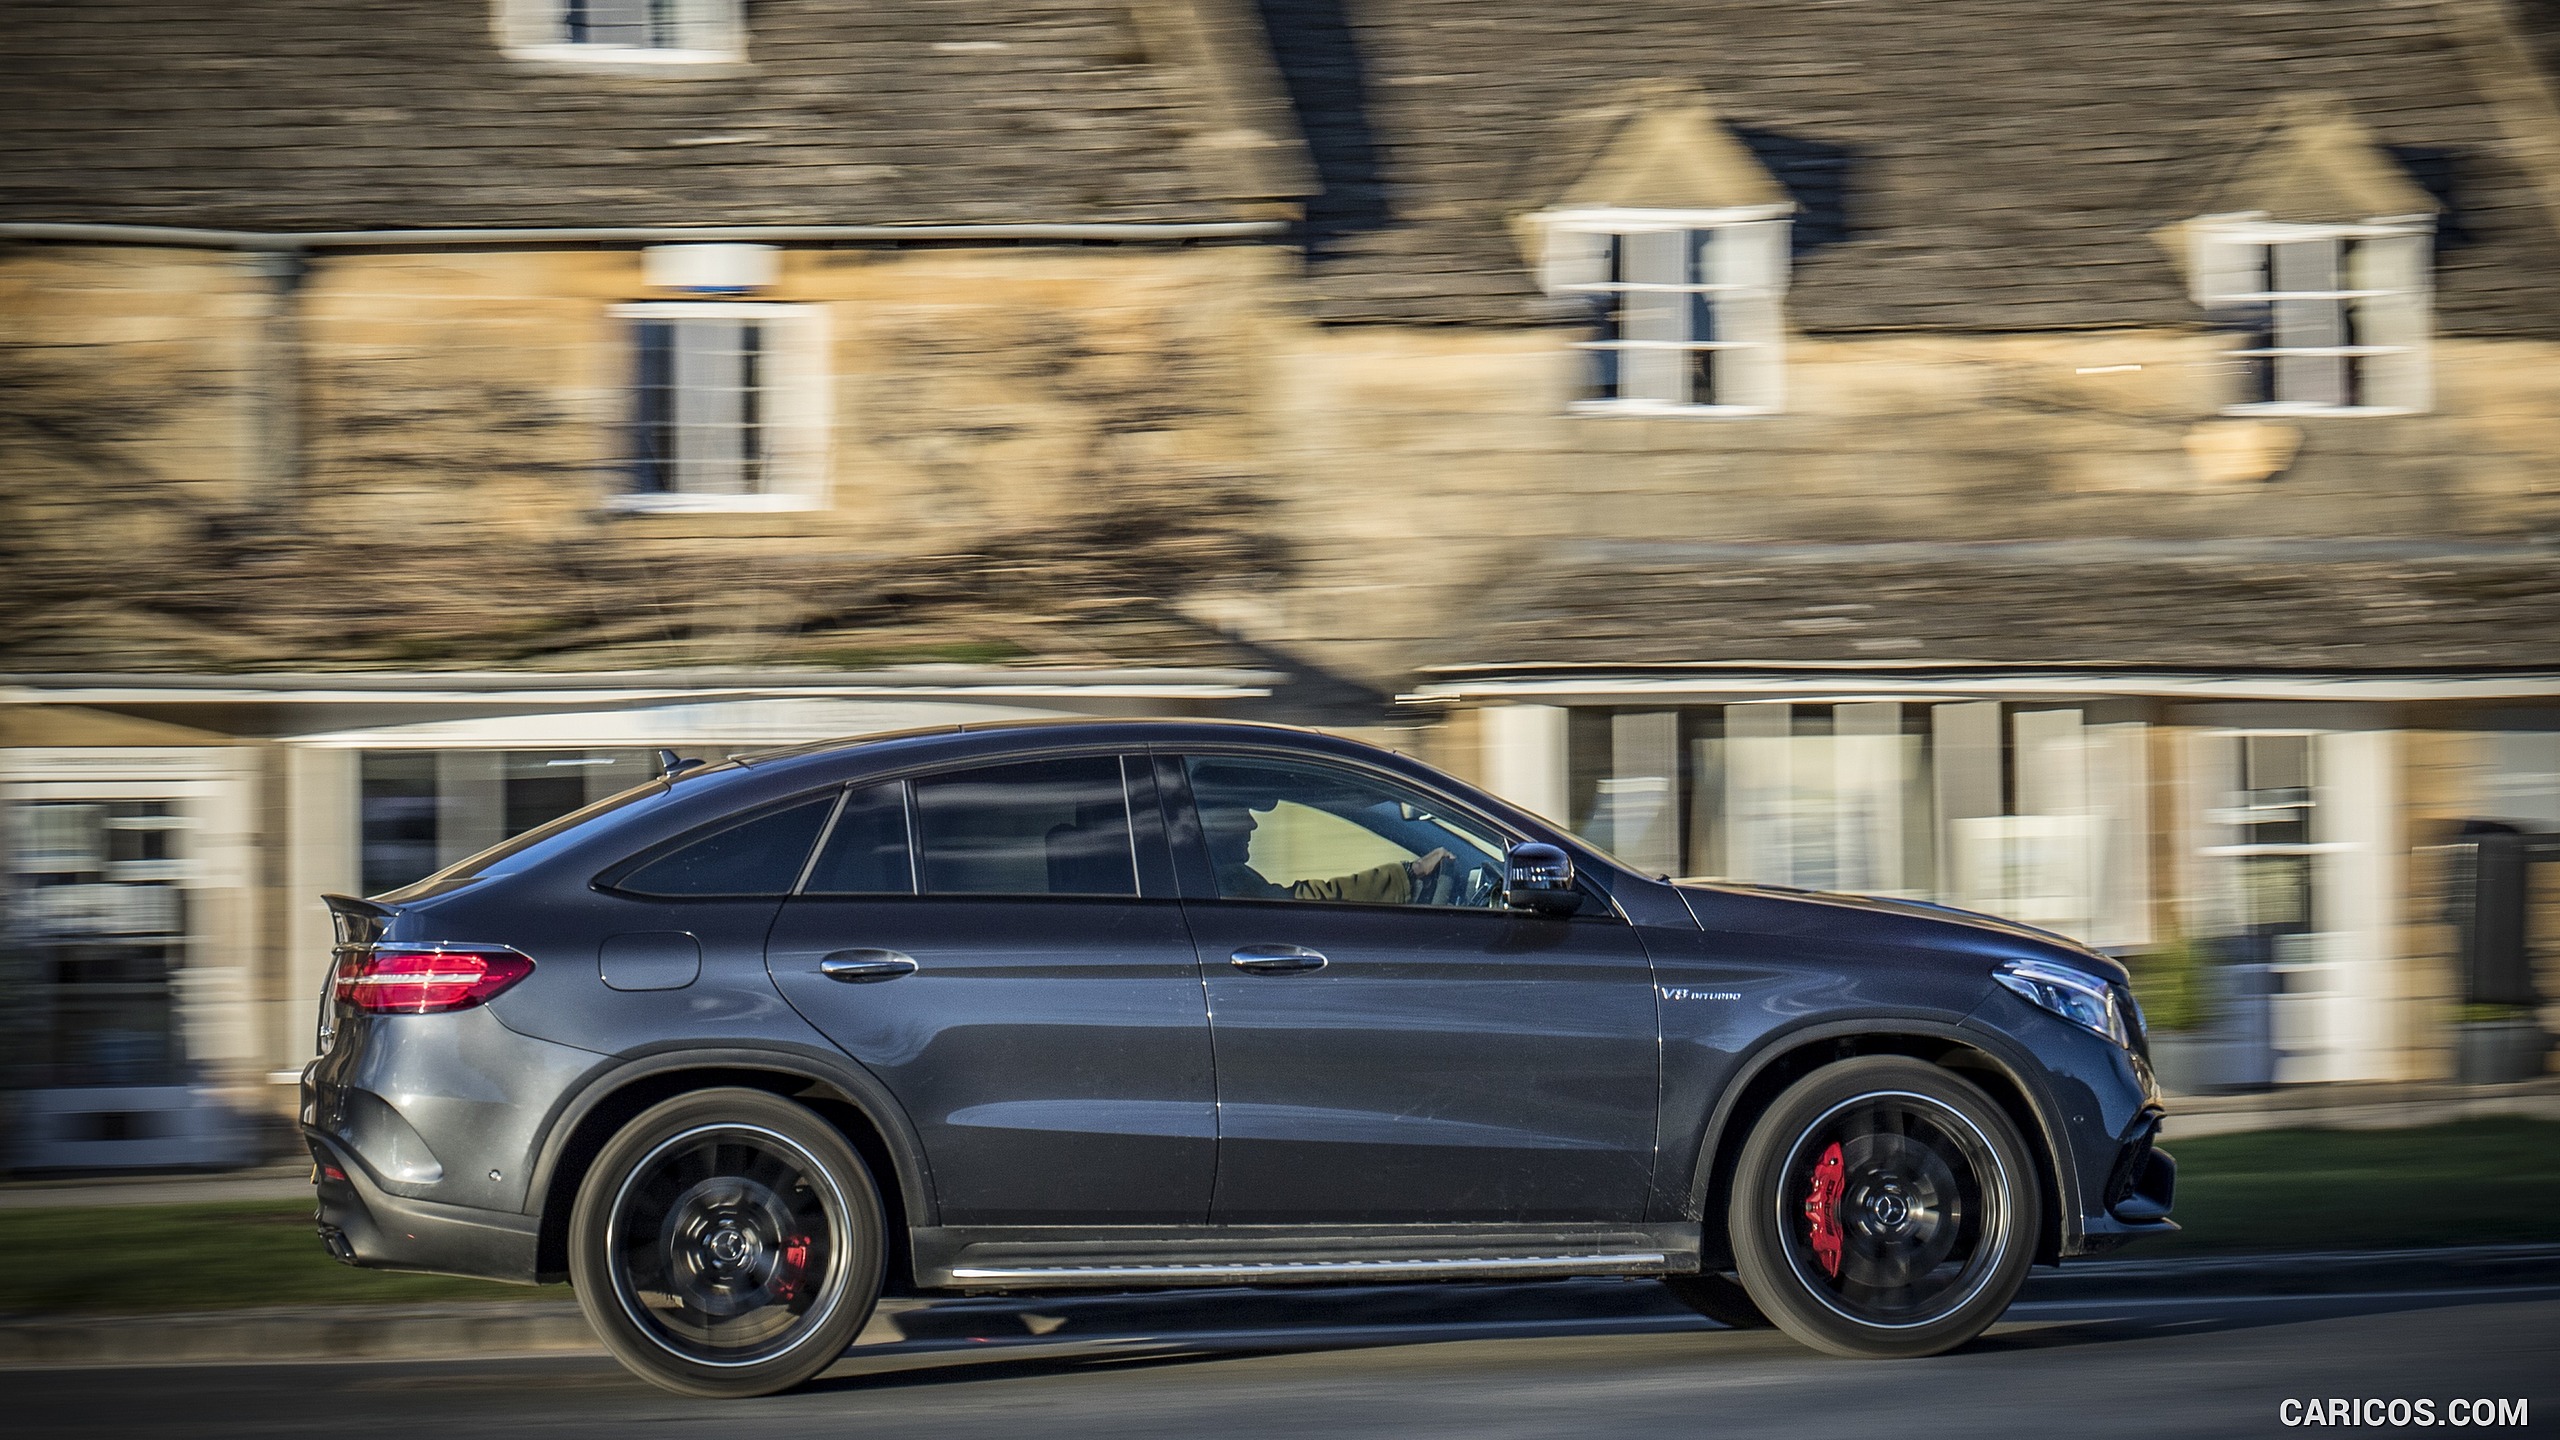 2016 Mercedes-AMG GLE 63 S Coupe (UK-Spec) - Side, #49 of 65